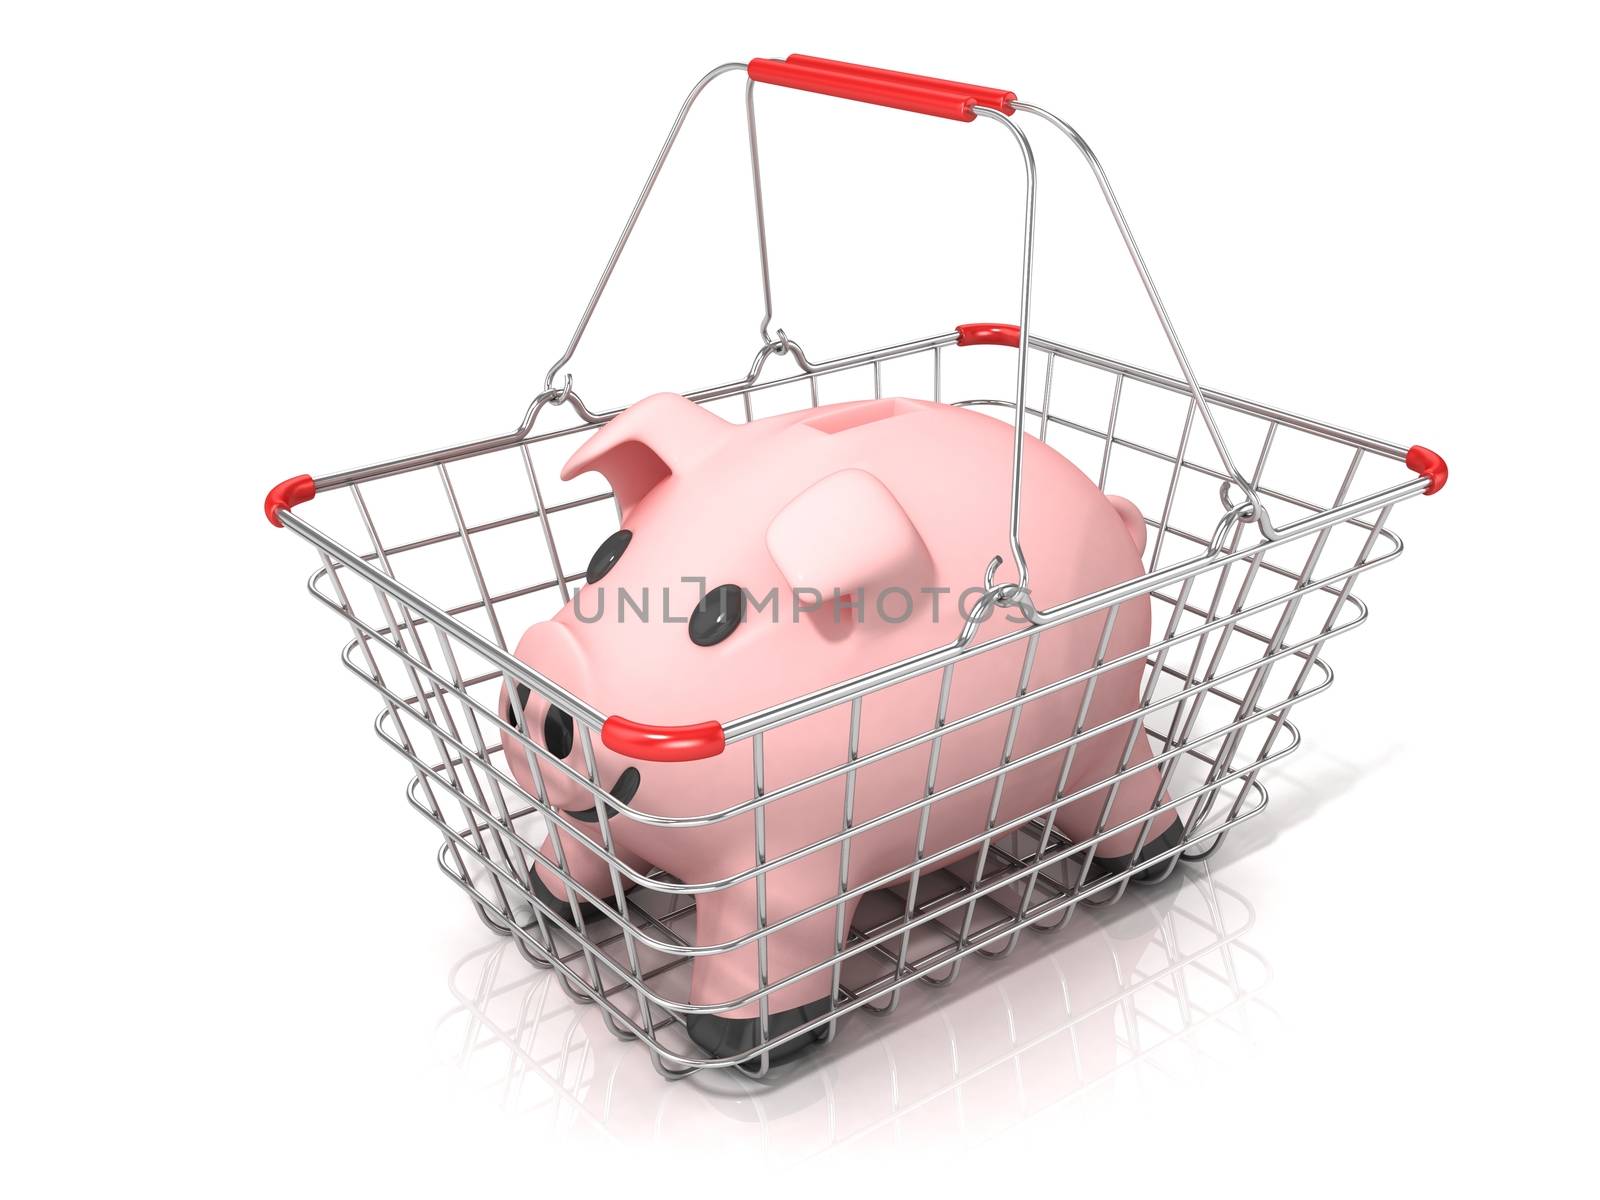 Piggy bank money box standing in steel wire shopping basket isolated on a white background